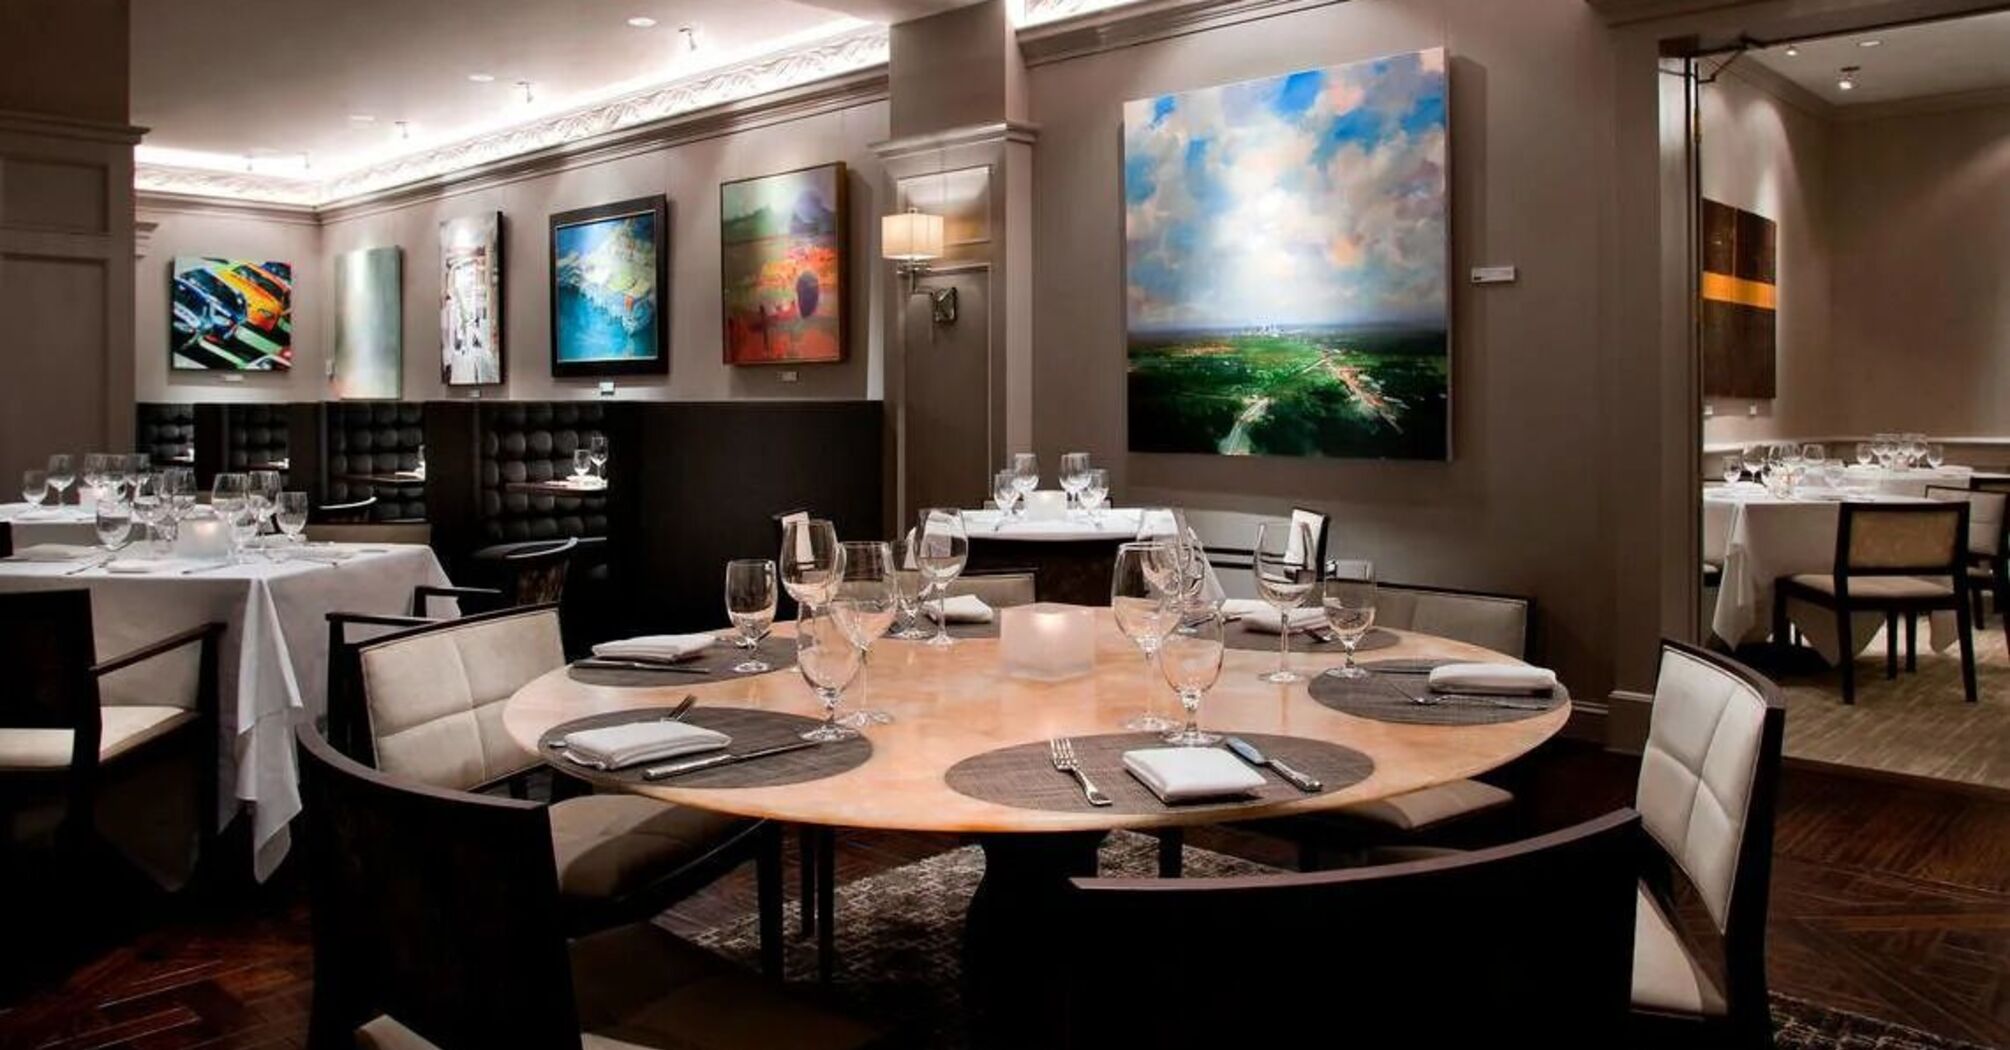 Local ingredients and sophisticated interior: a high-class restaurant in Charlotte, which has been recognized as one of the best in the world